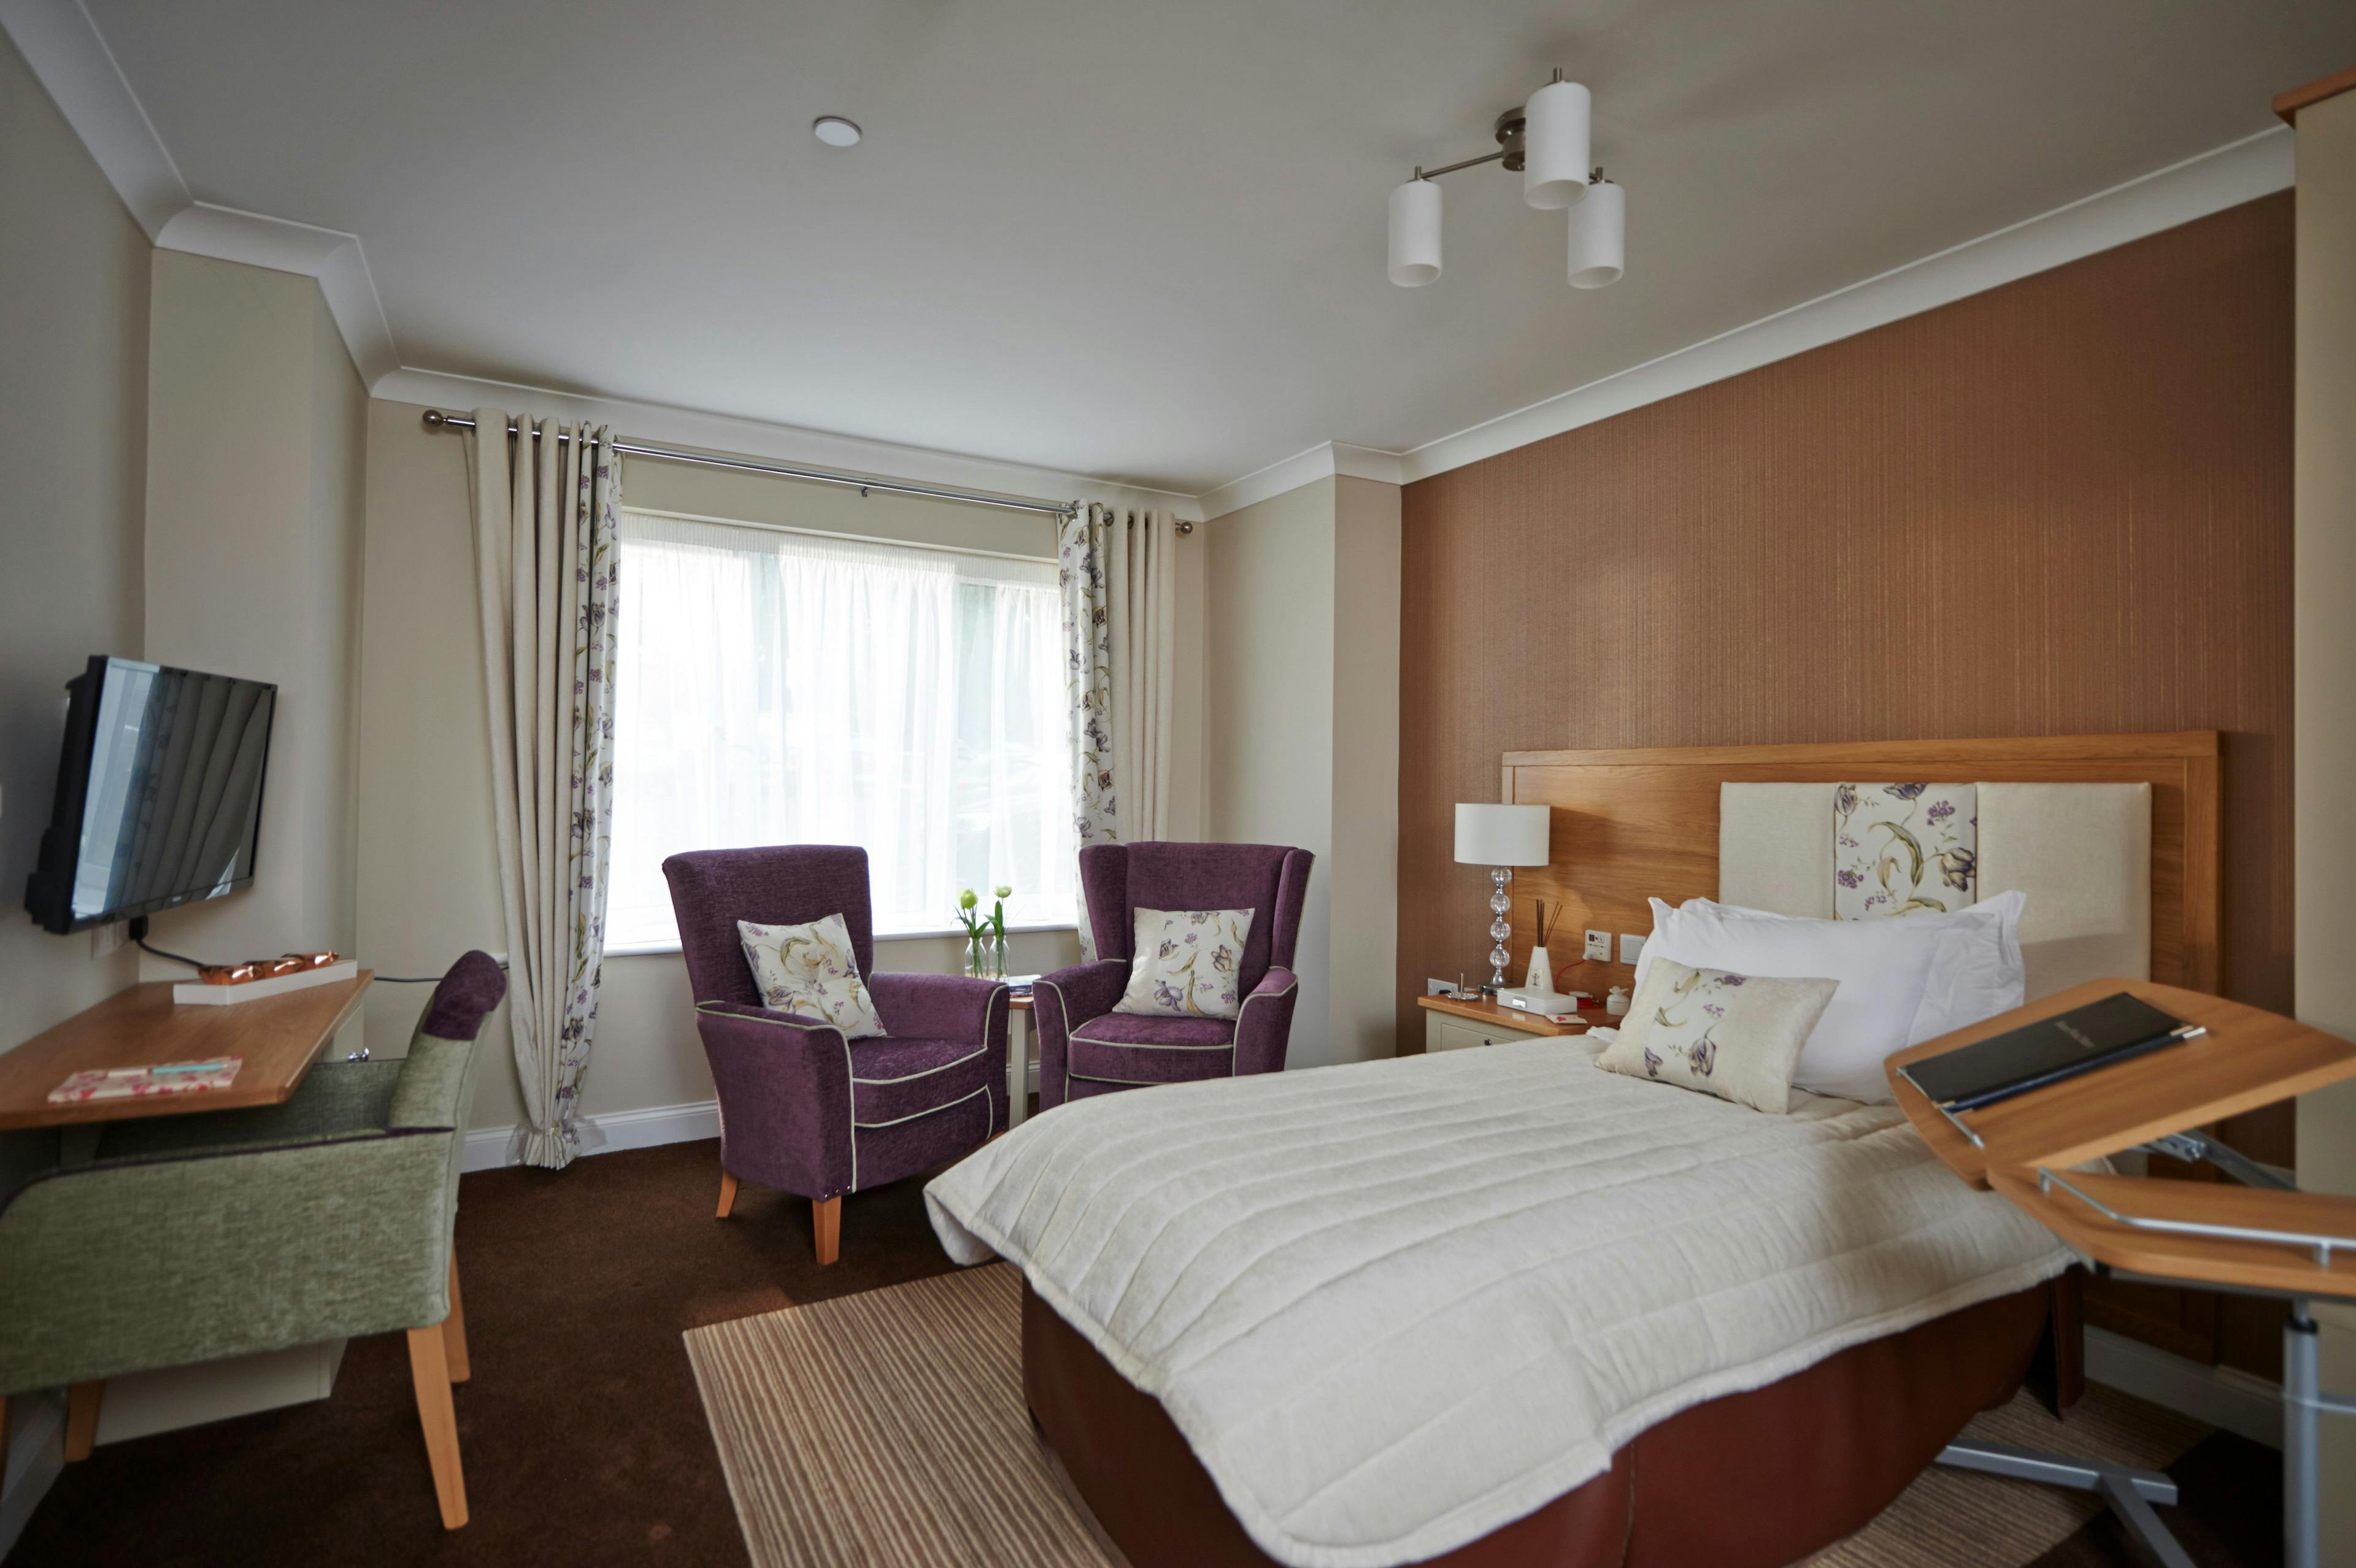 Porthaven Care Homes - Lincroft Meadow care home 2